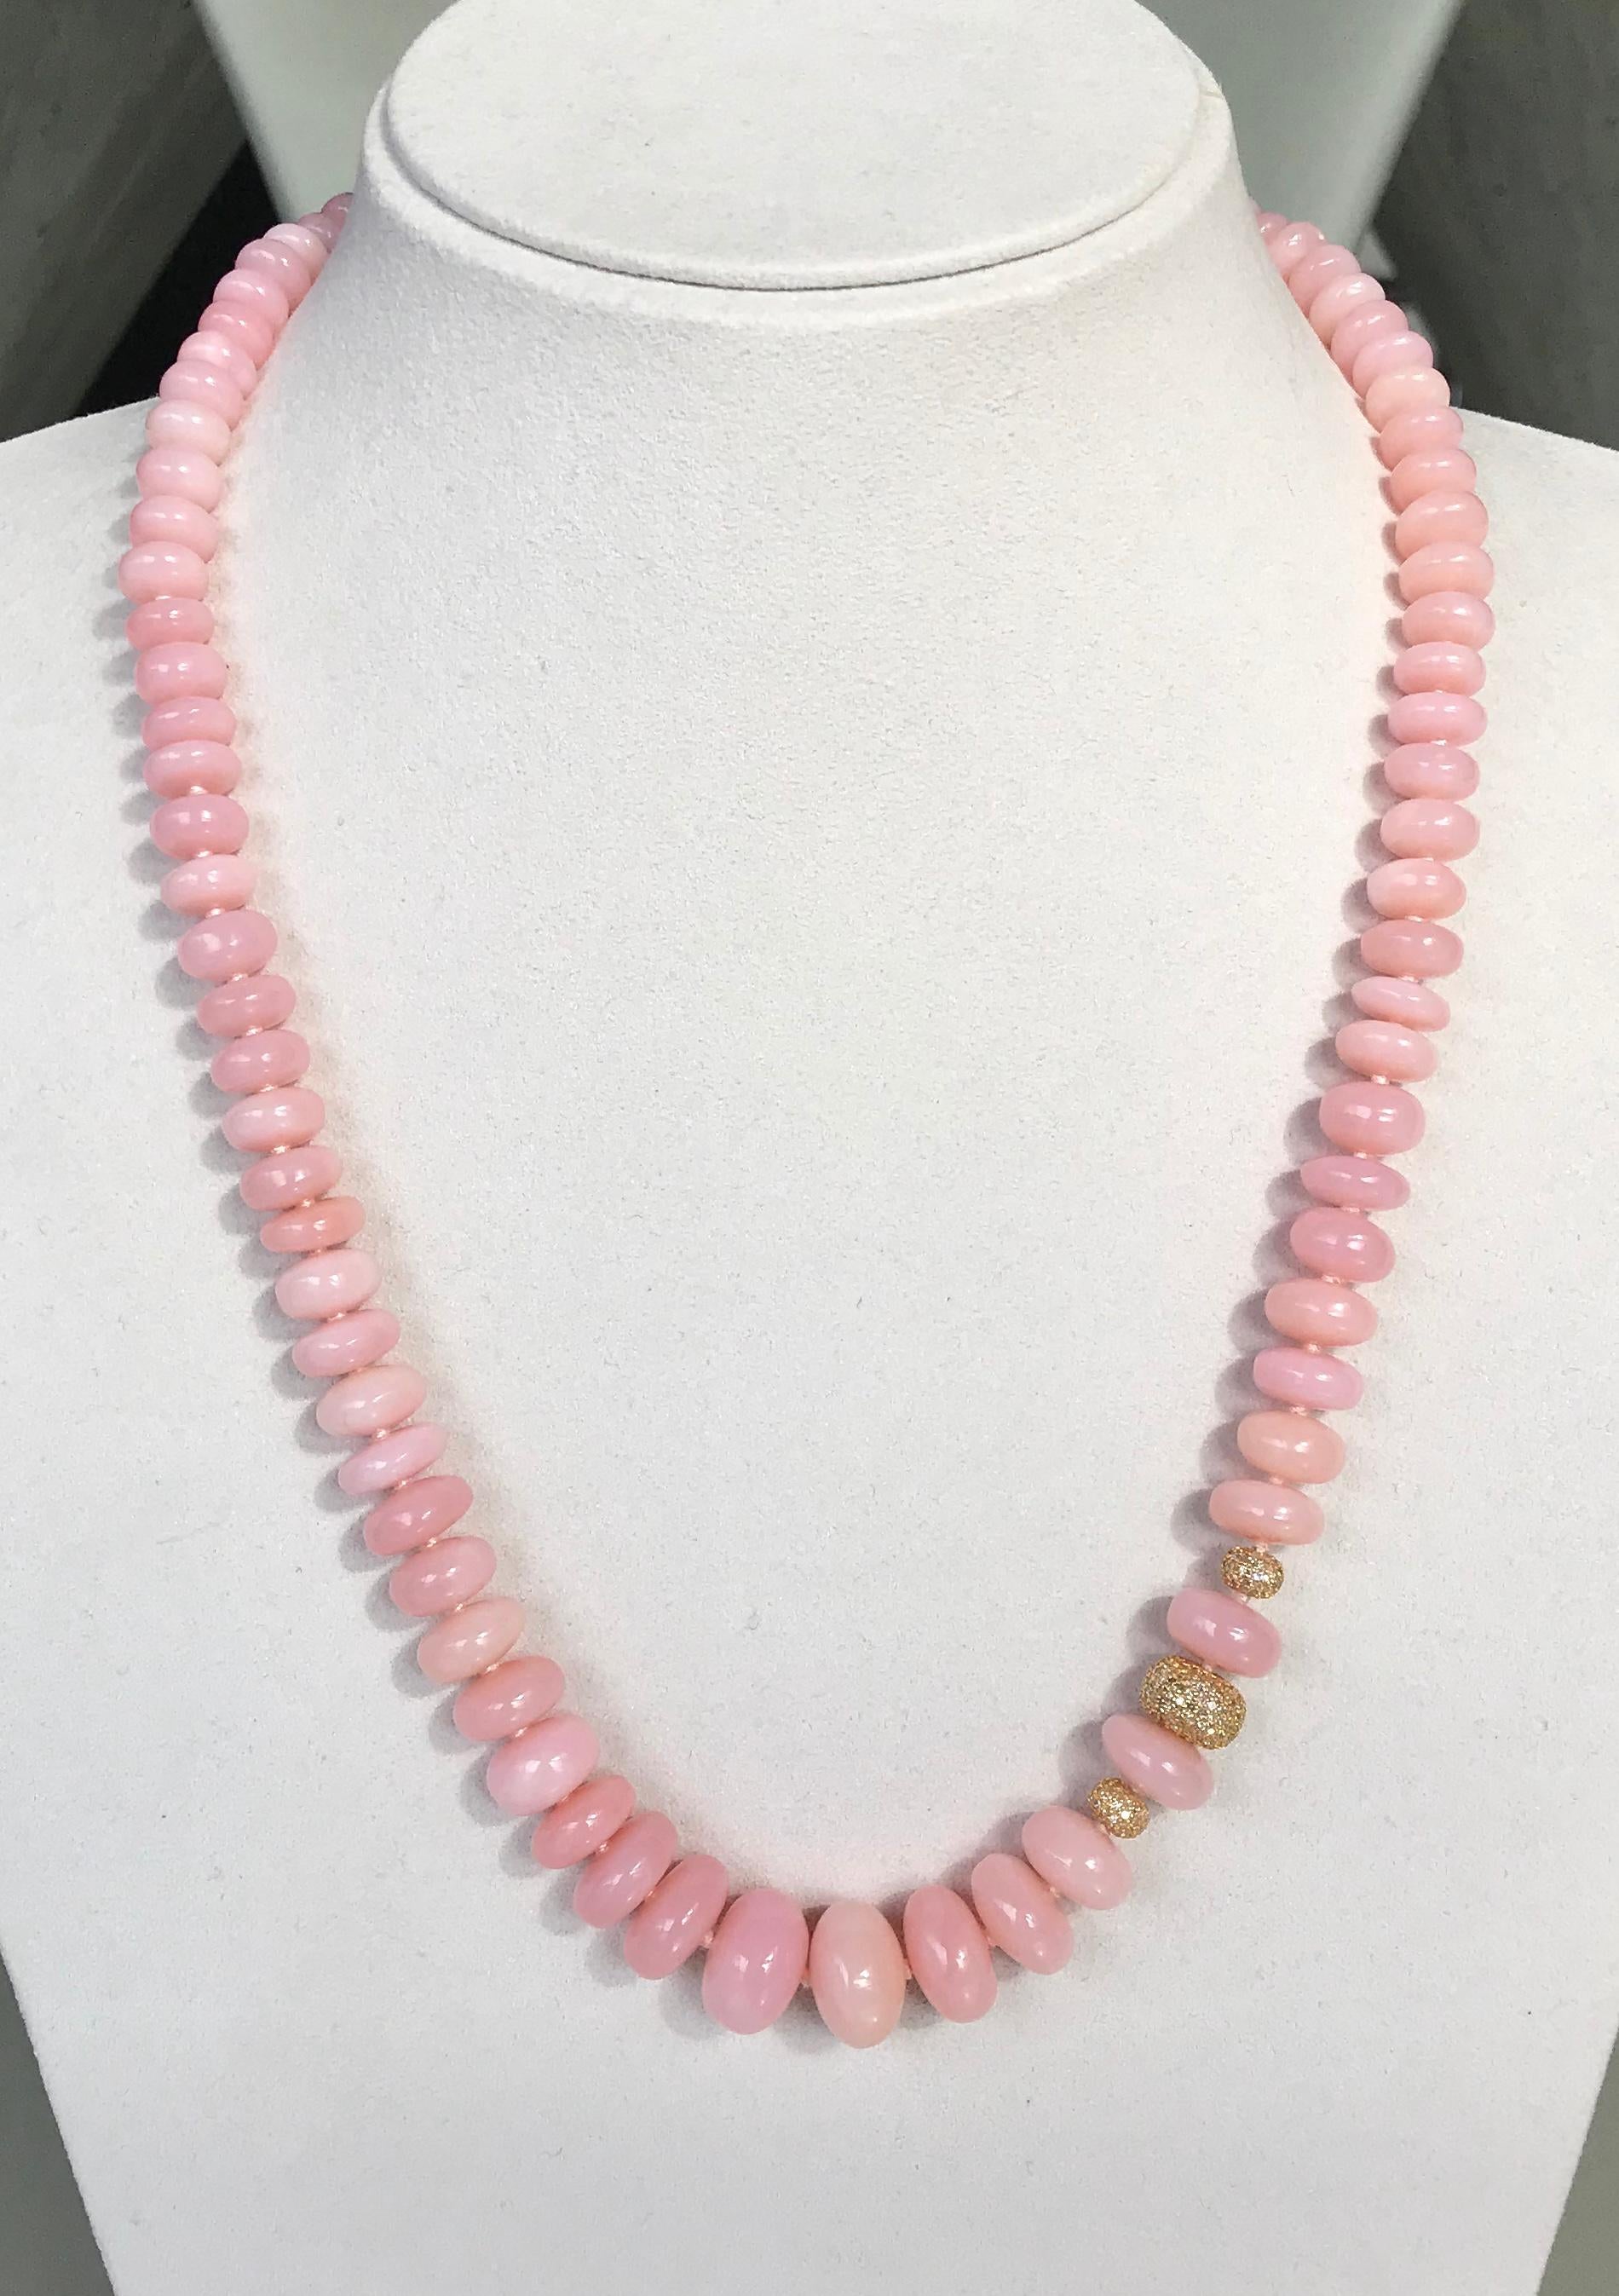 Women's or Men's  14 Karat Yellow Gold Pink Opal Beaded Necklace with Diamond Beads and Clasp